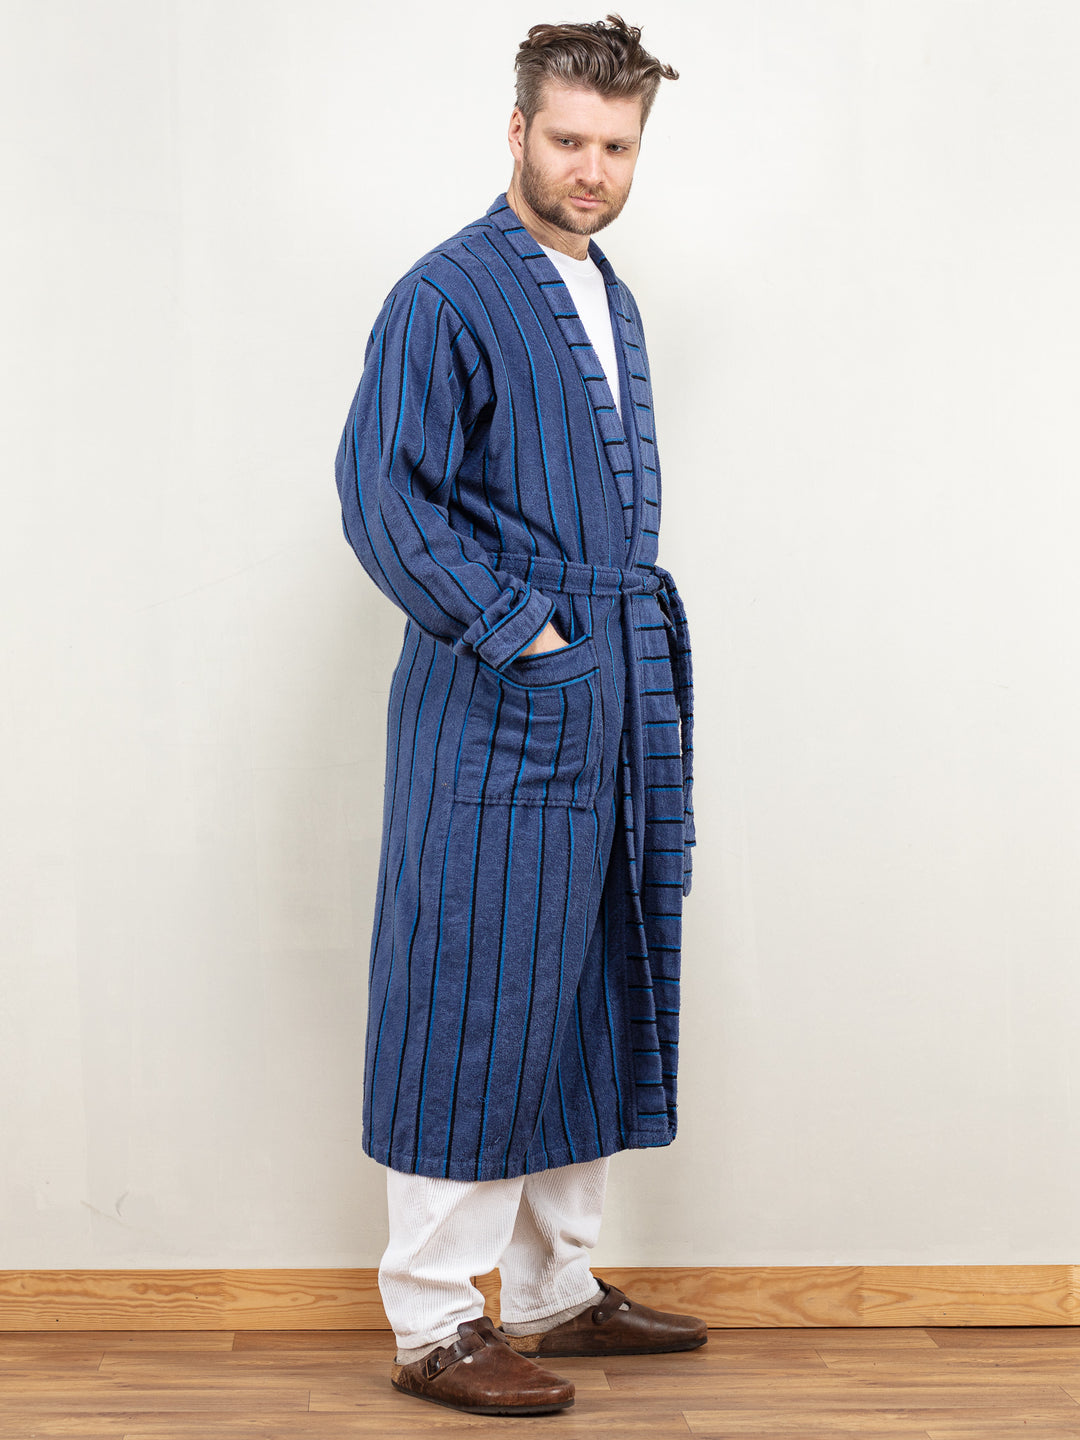 Men Dressing Gown vintage 00's morning robe bathrobe navy terry cotton wrap belted hugh hefner gift for him birthday size extra large XL